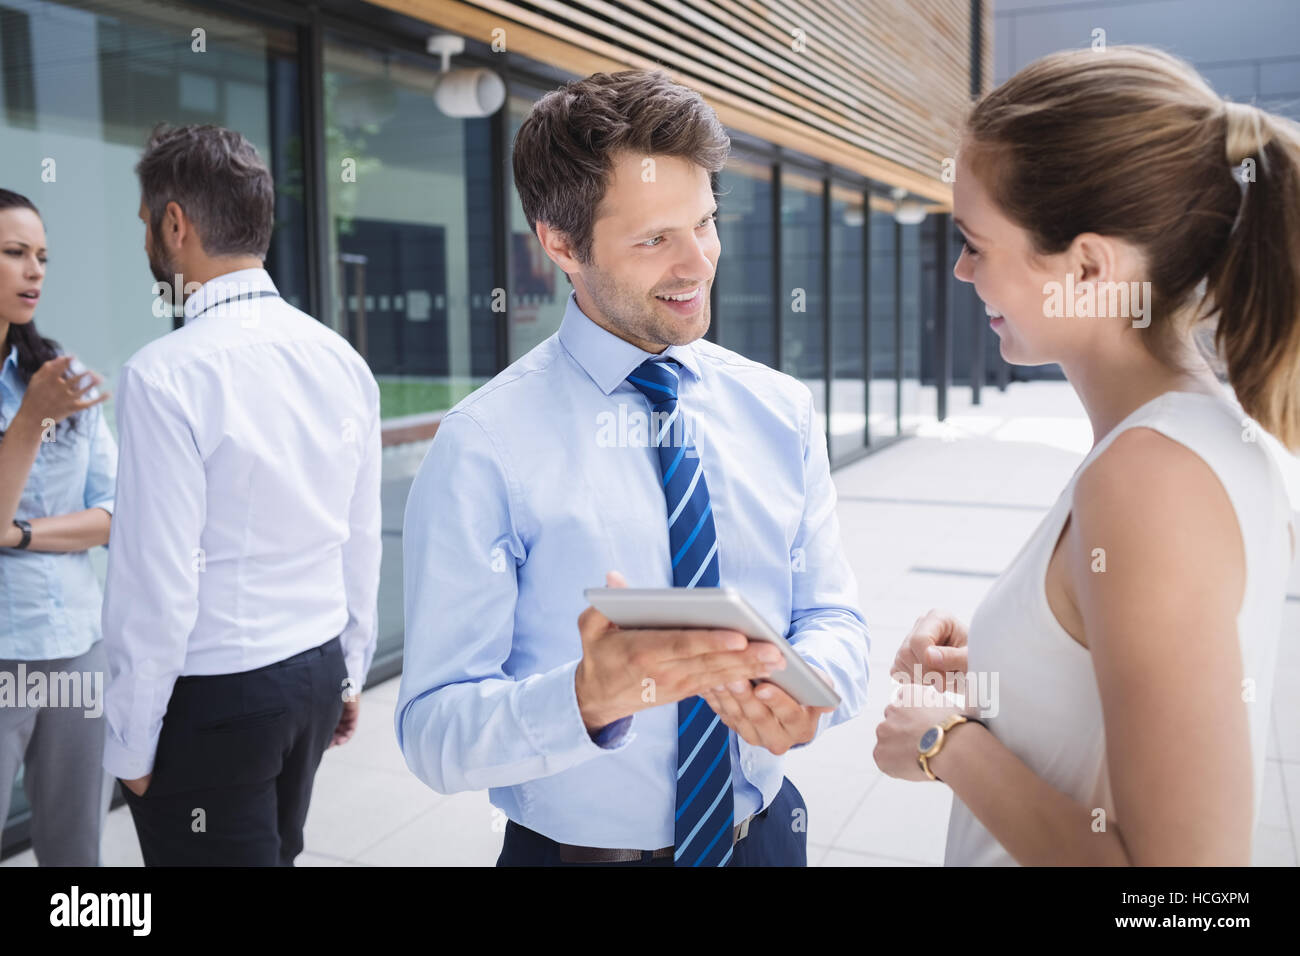 Businessman and colleague discussing over digital tablet Stock Photo